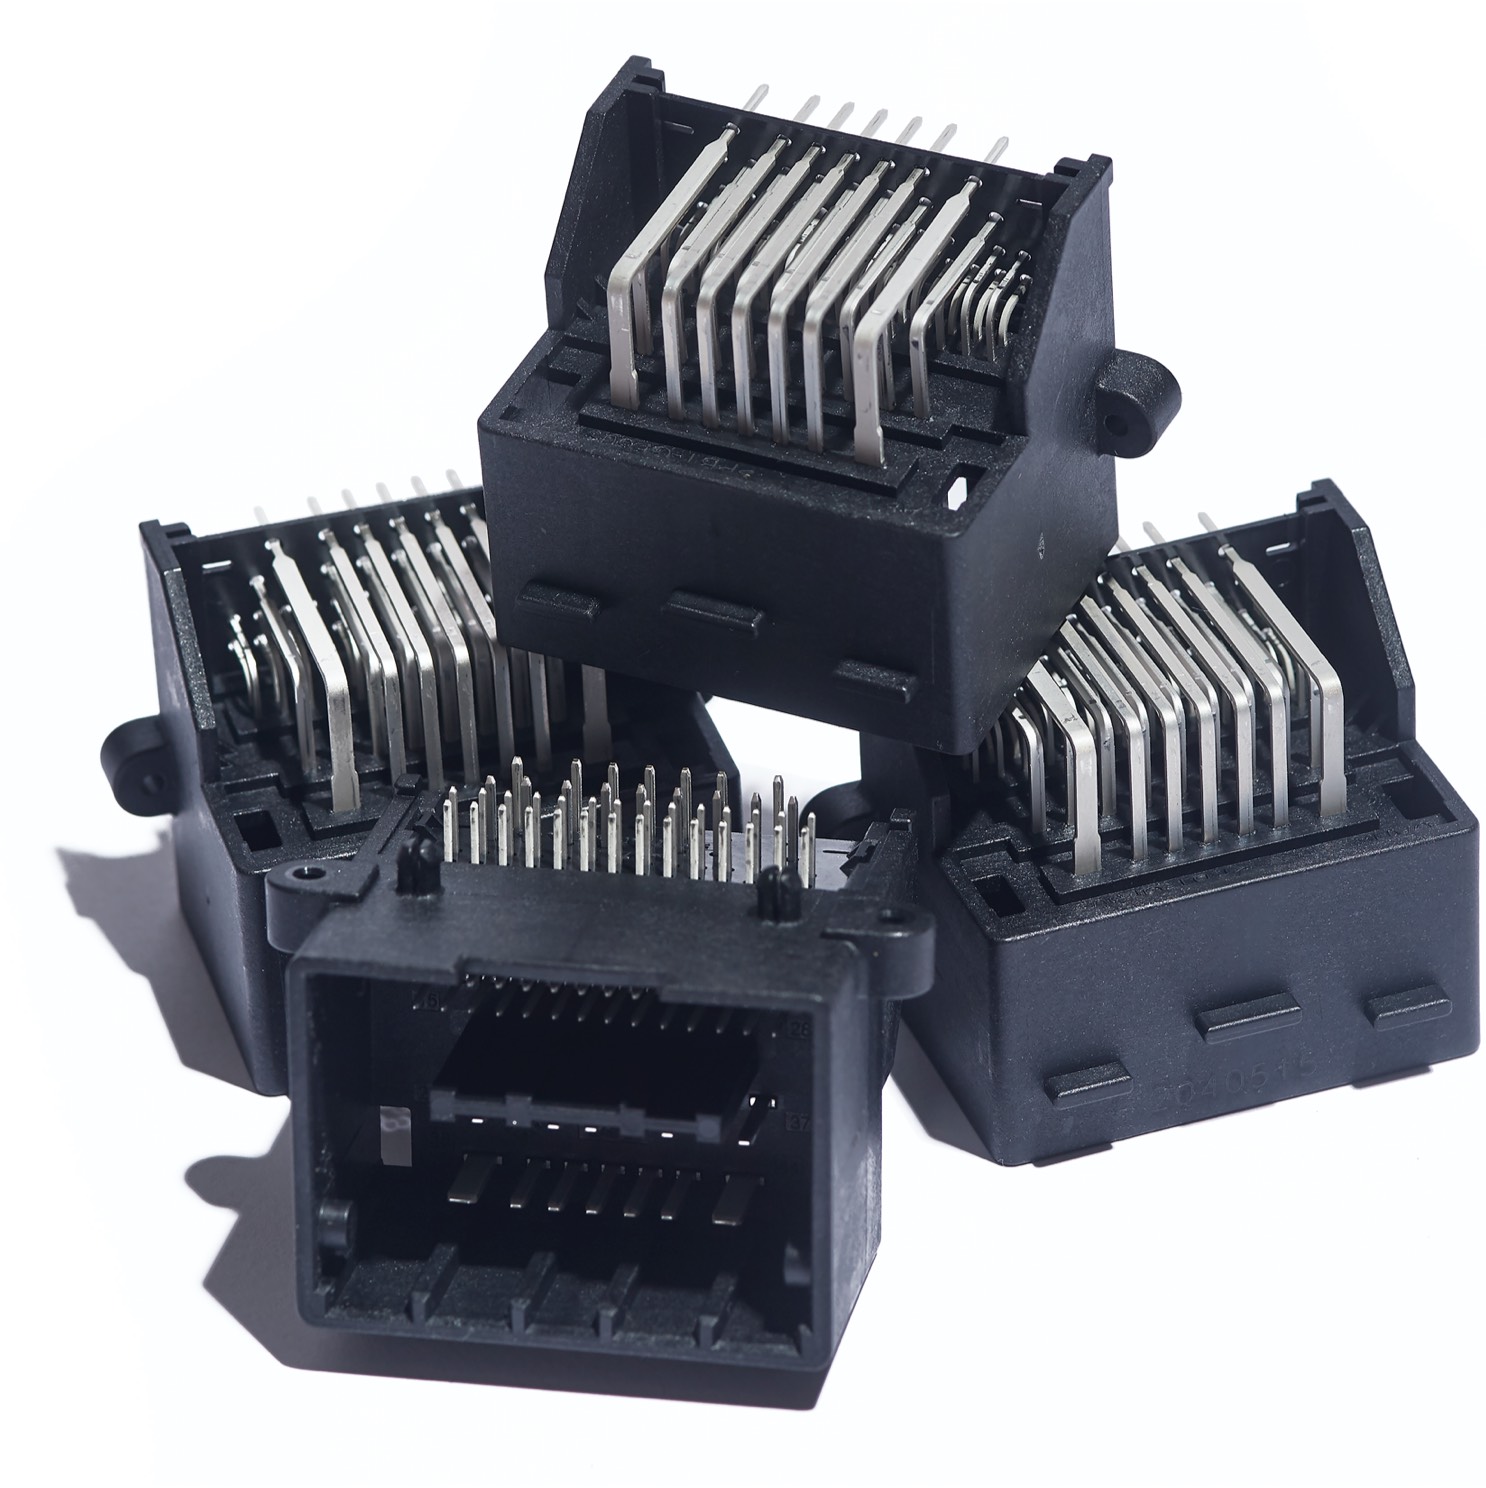 Small black electrical connector pieces